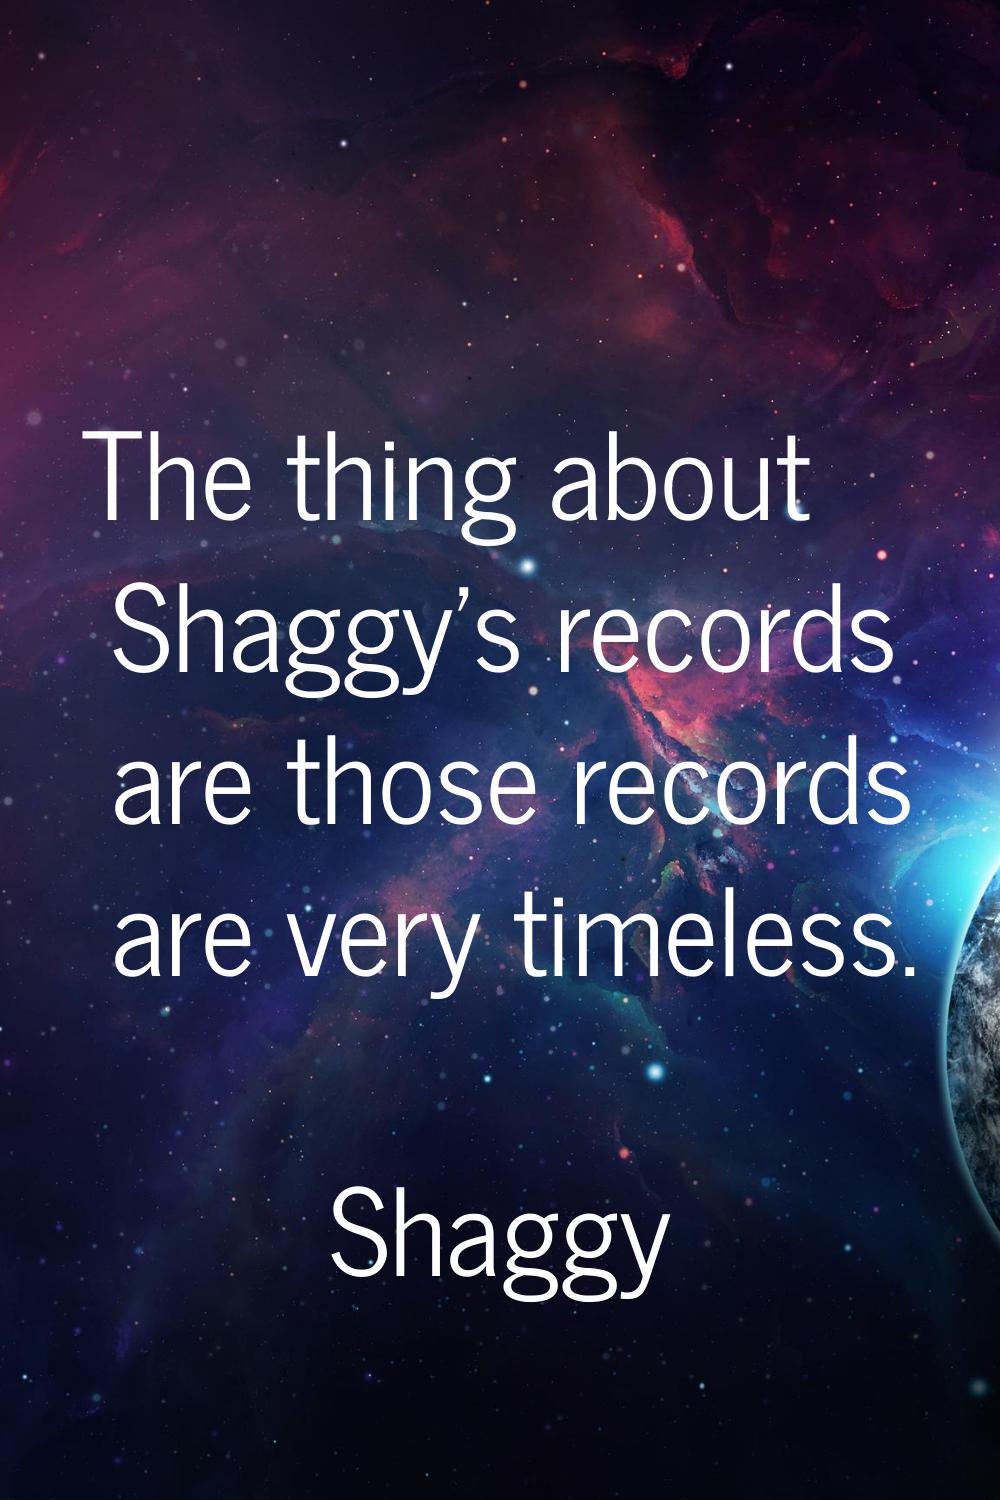 The thing about Shaggy's records are those records are very timeless.